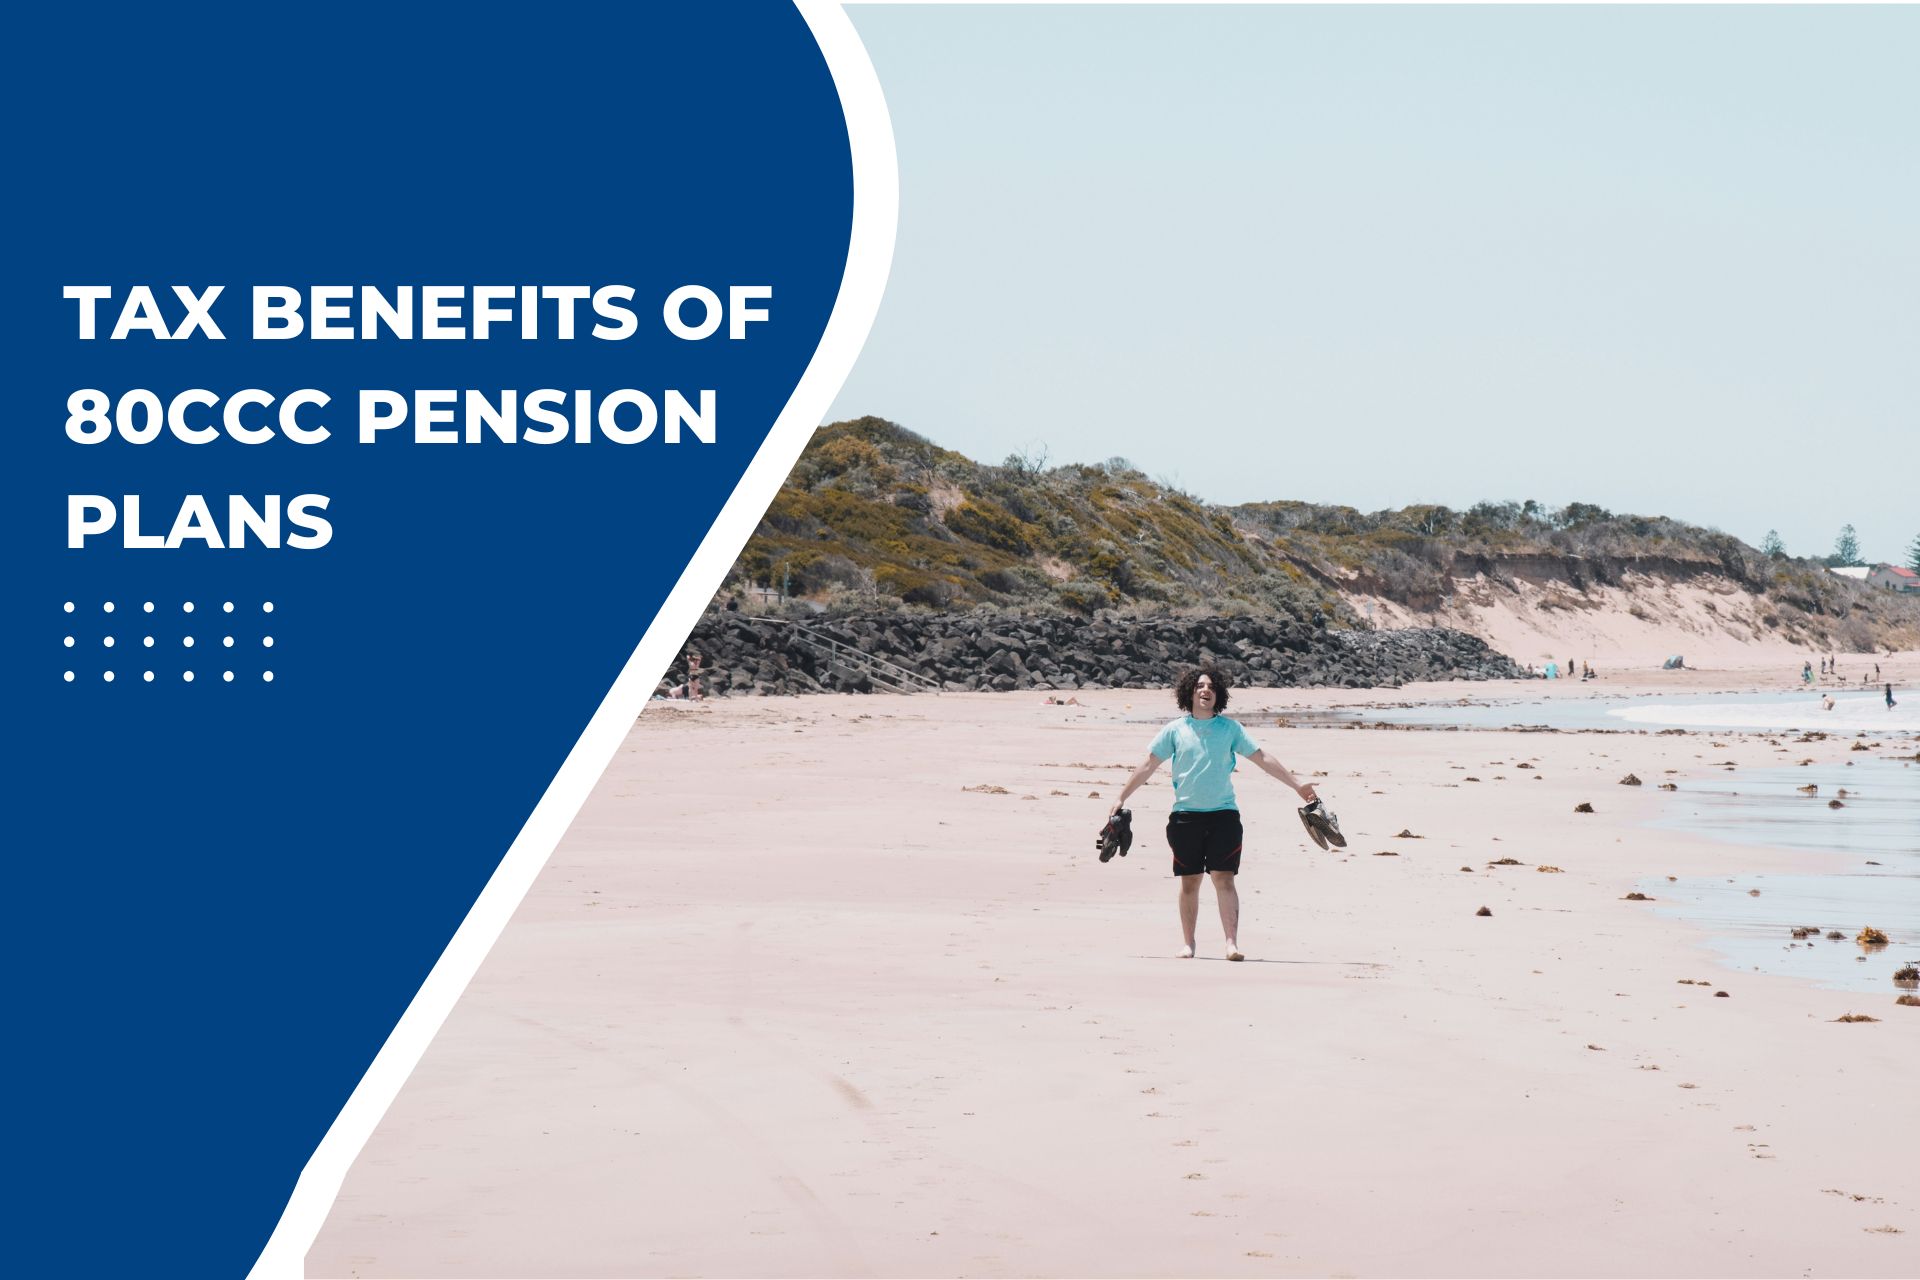 Tax Benefits of 80CCC Pension Plans